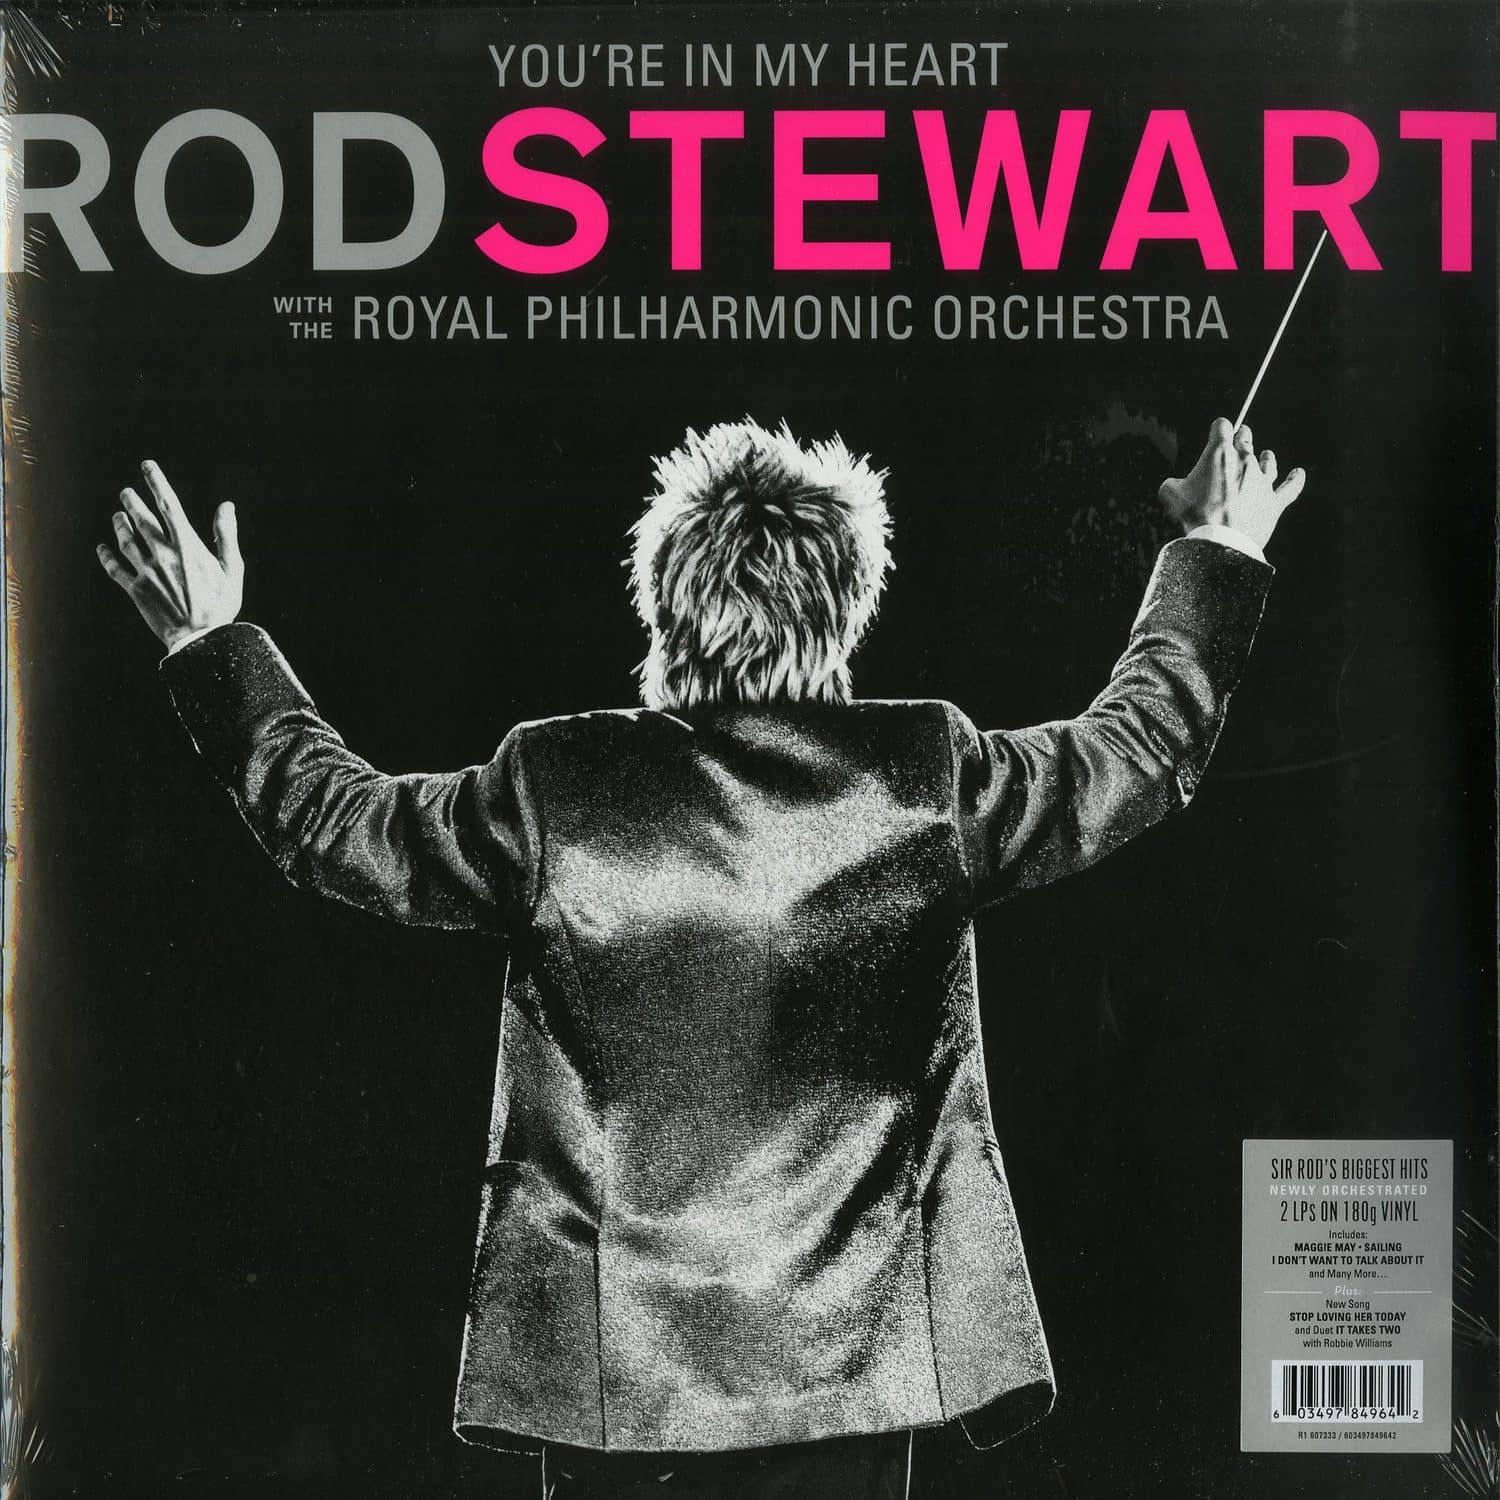 Rod Stewart & The Royal Philharmonic Orchestra - YOURE IN MY HEART 